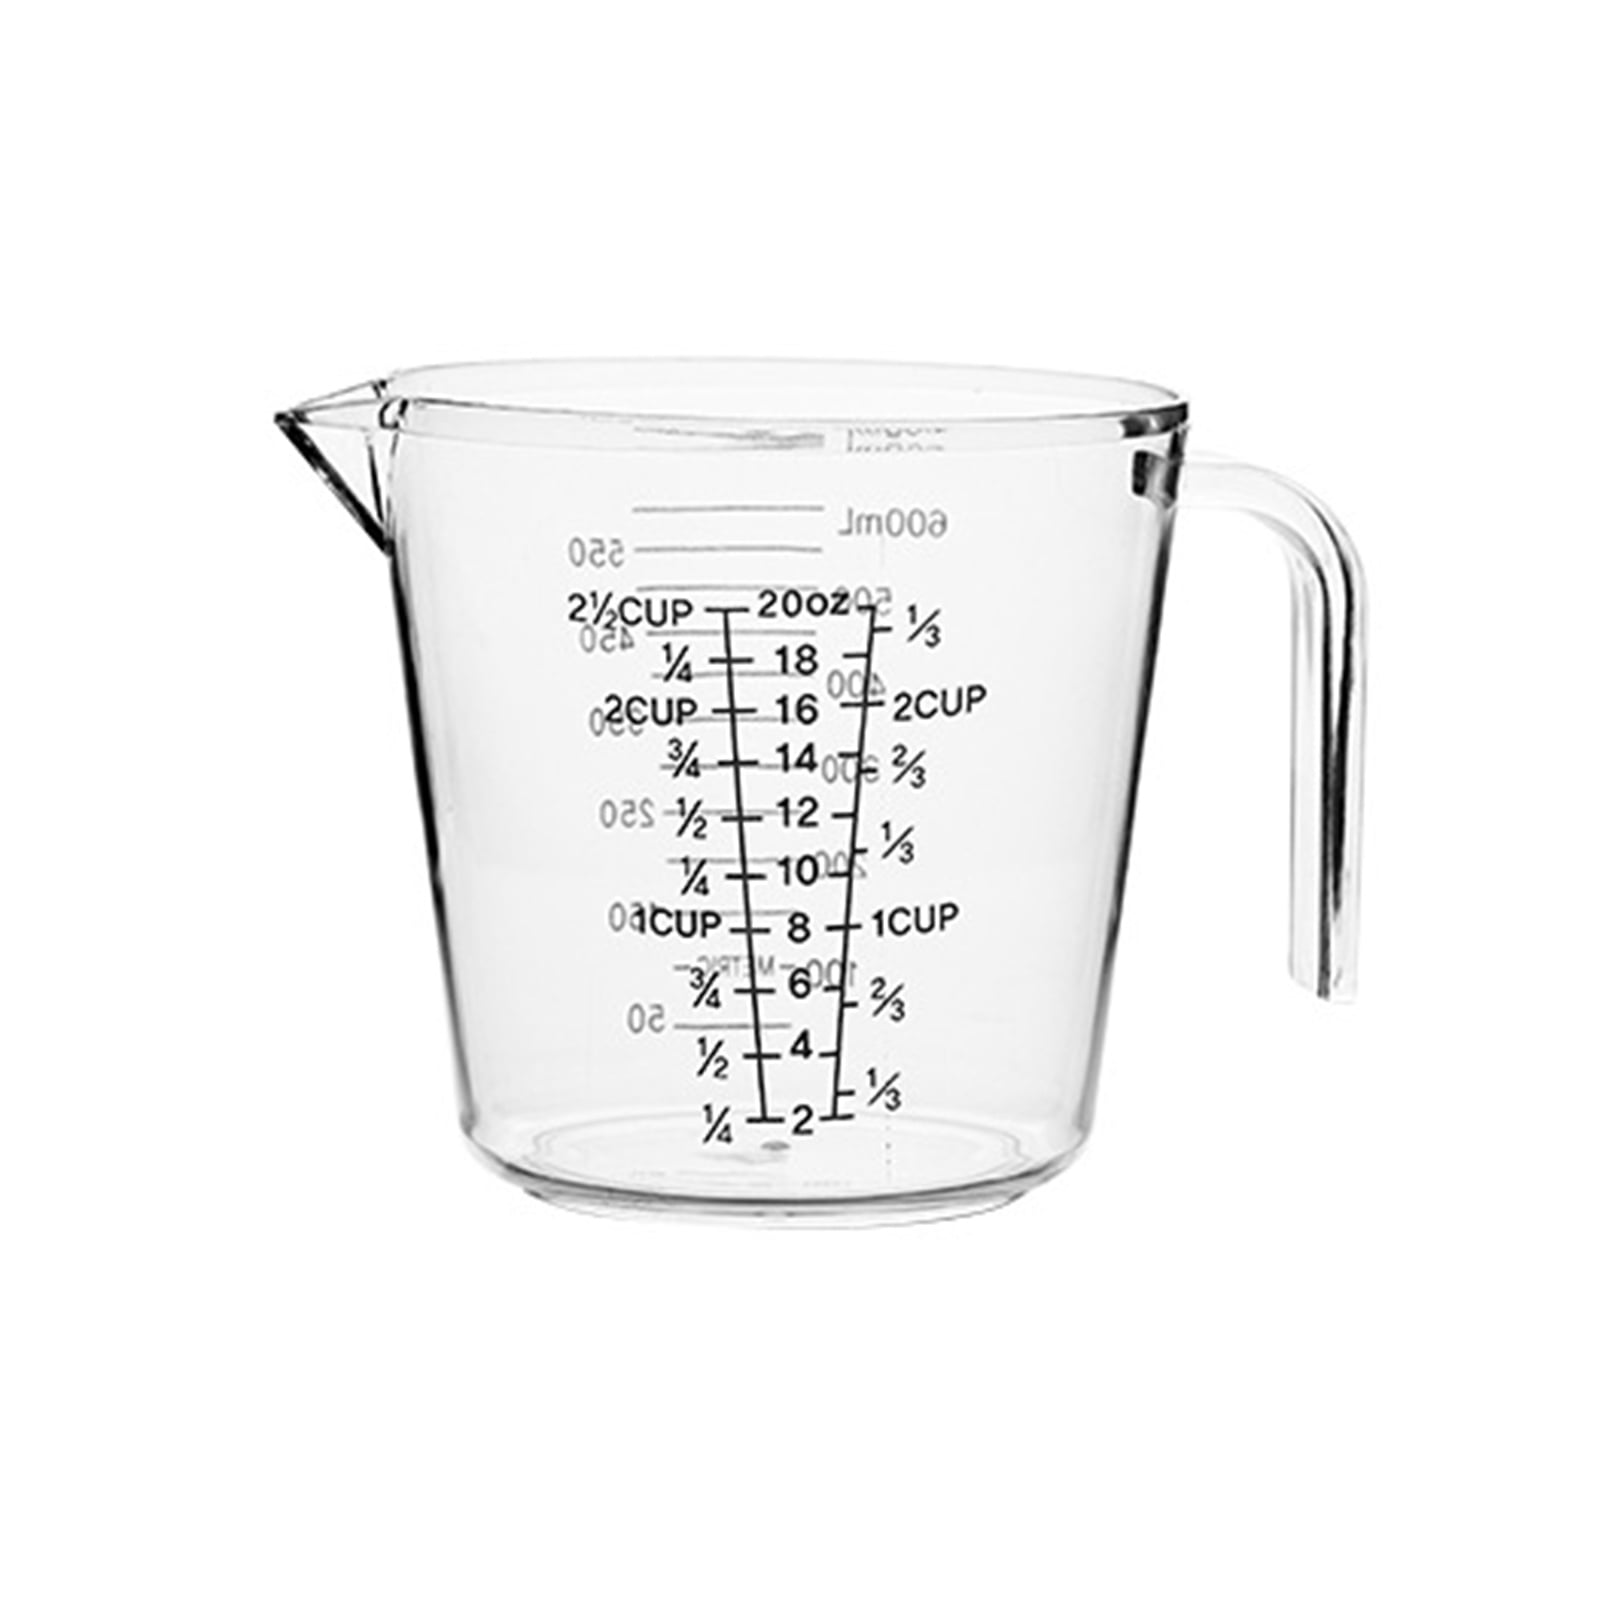 Amazing Abby - Melissa - Unbreakable Plastic Measuring Cups (5